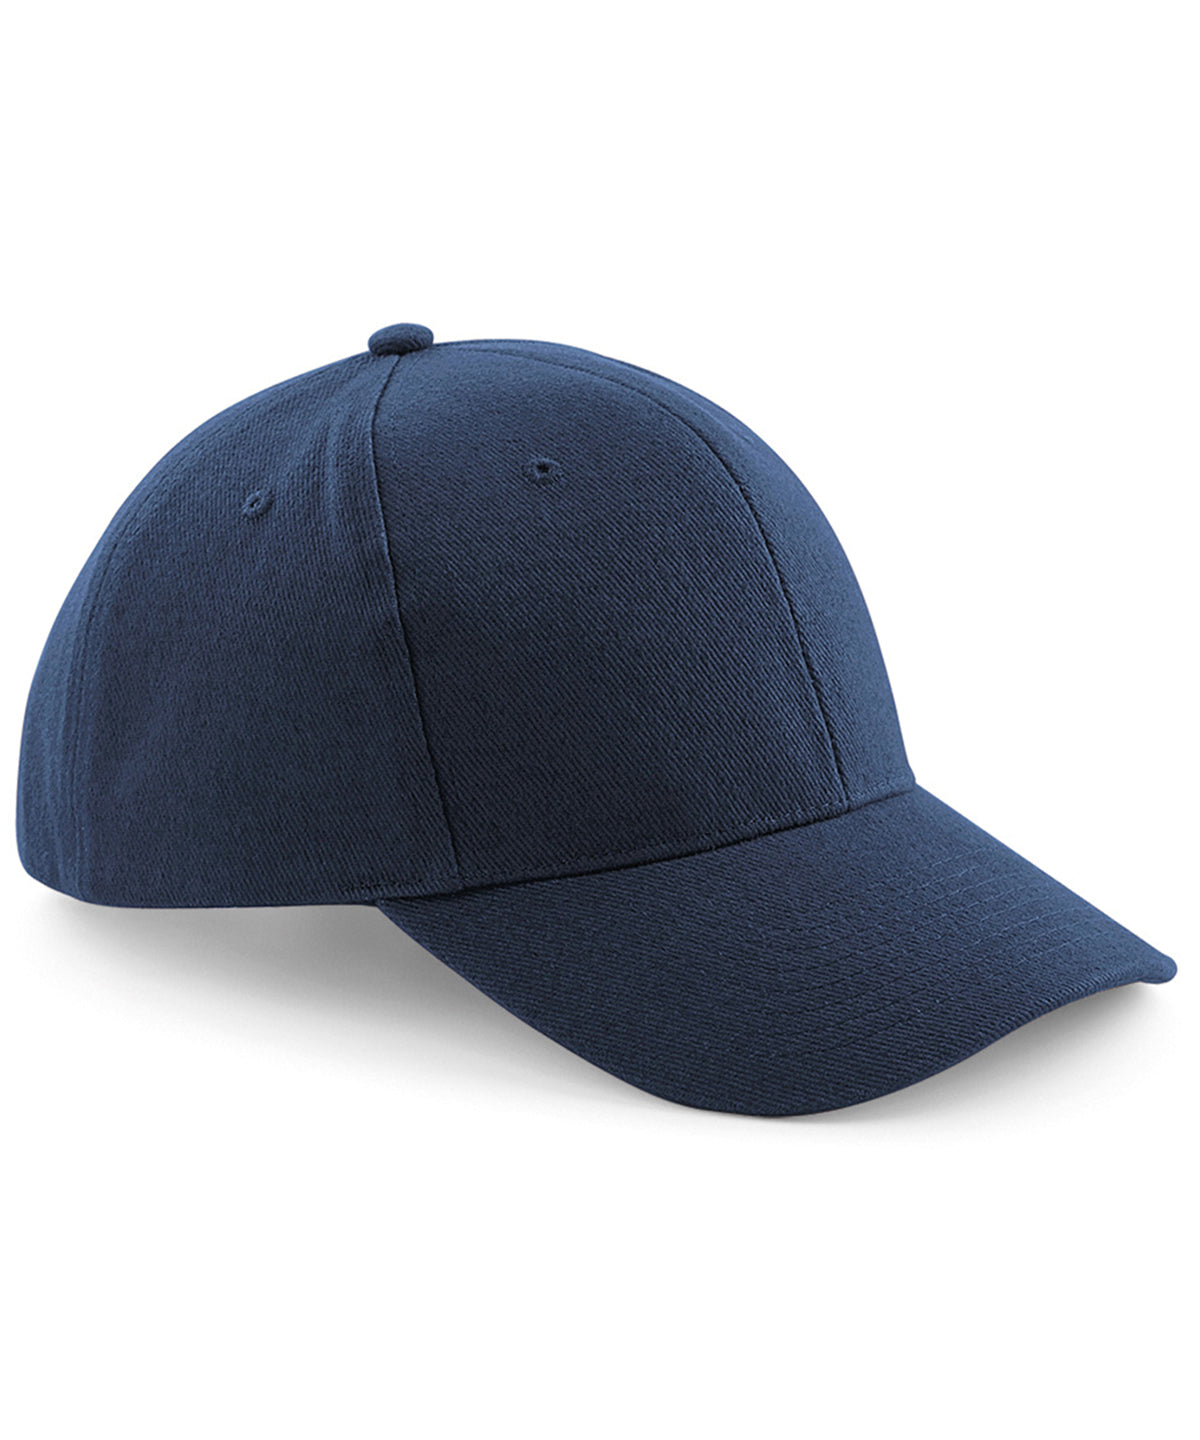 Personalised Caps - Navy Beechfield Pro-style heavy brushed cotton cap